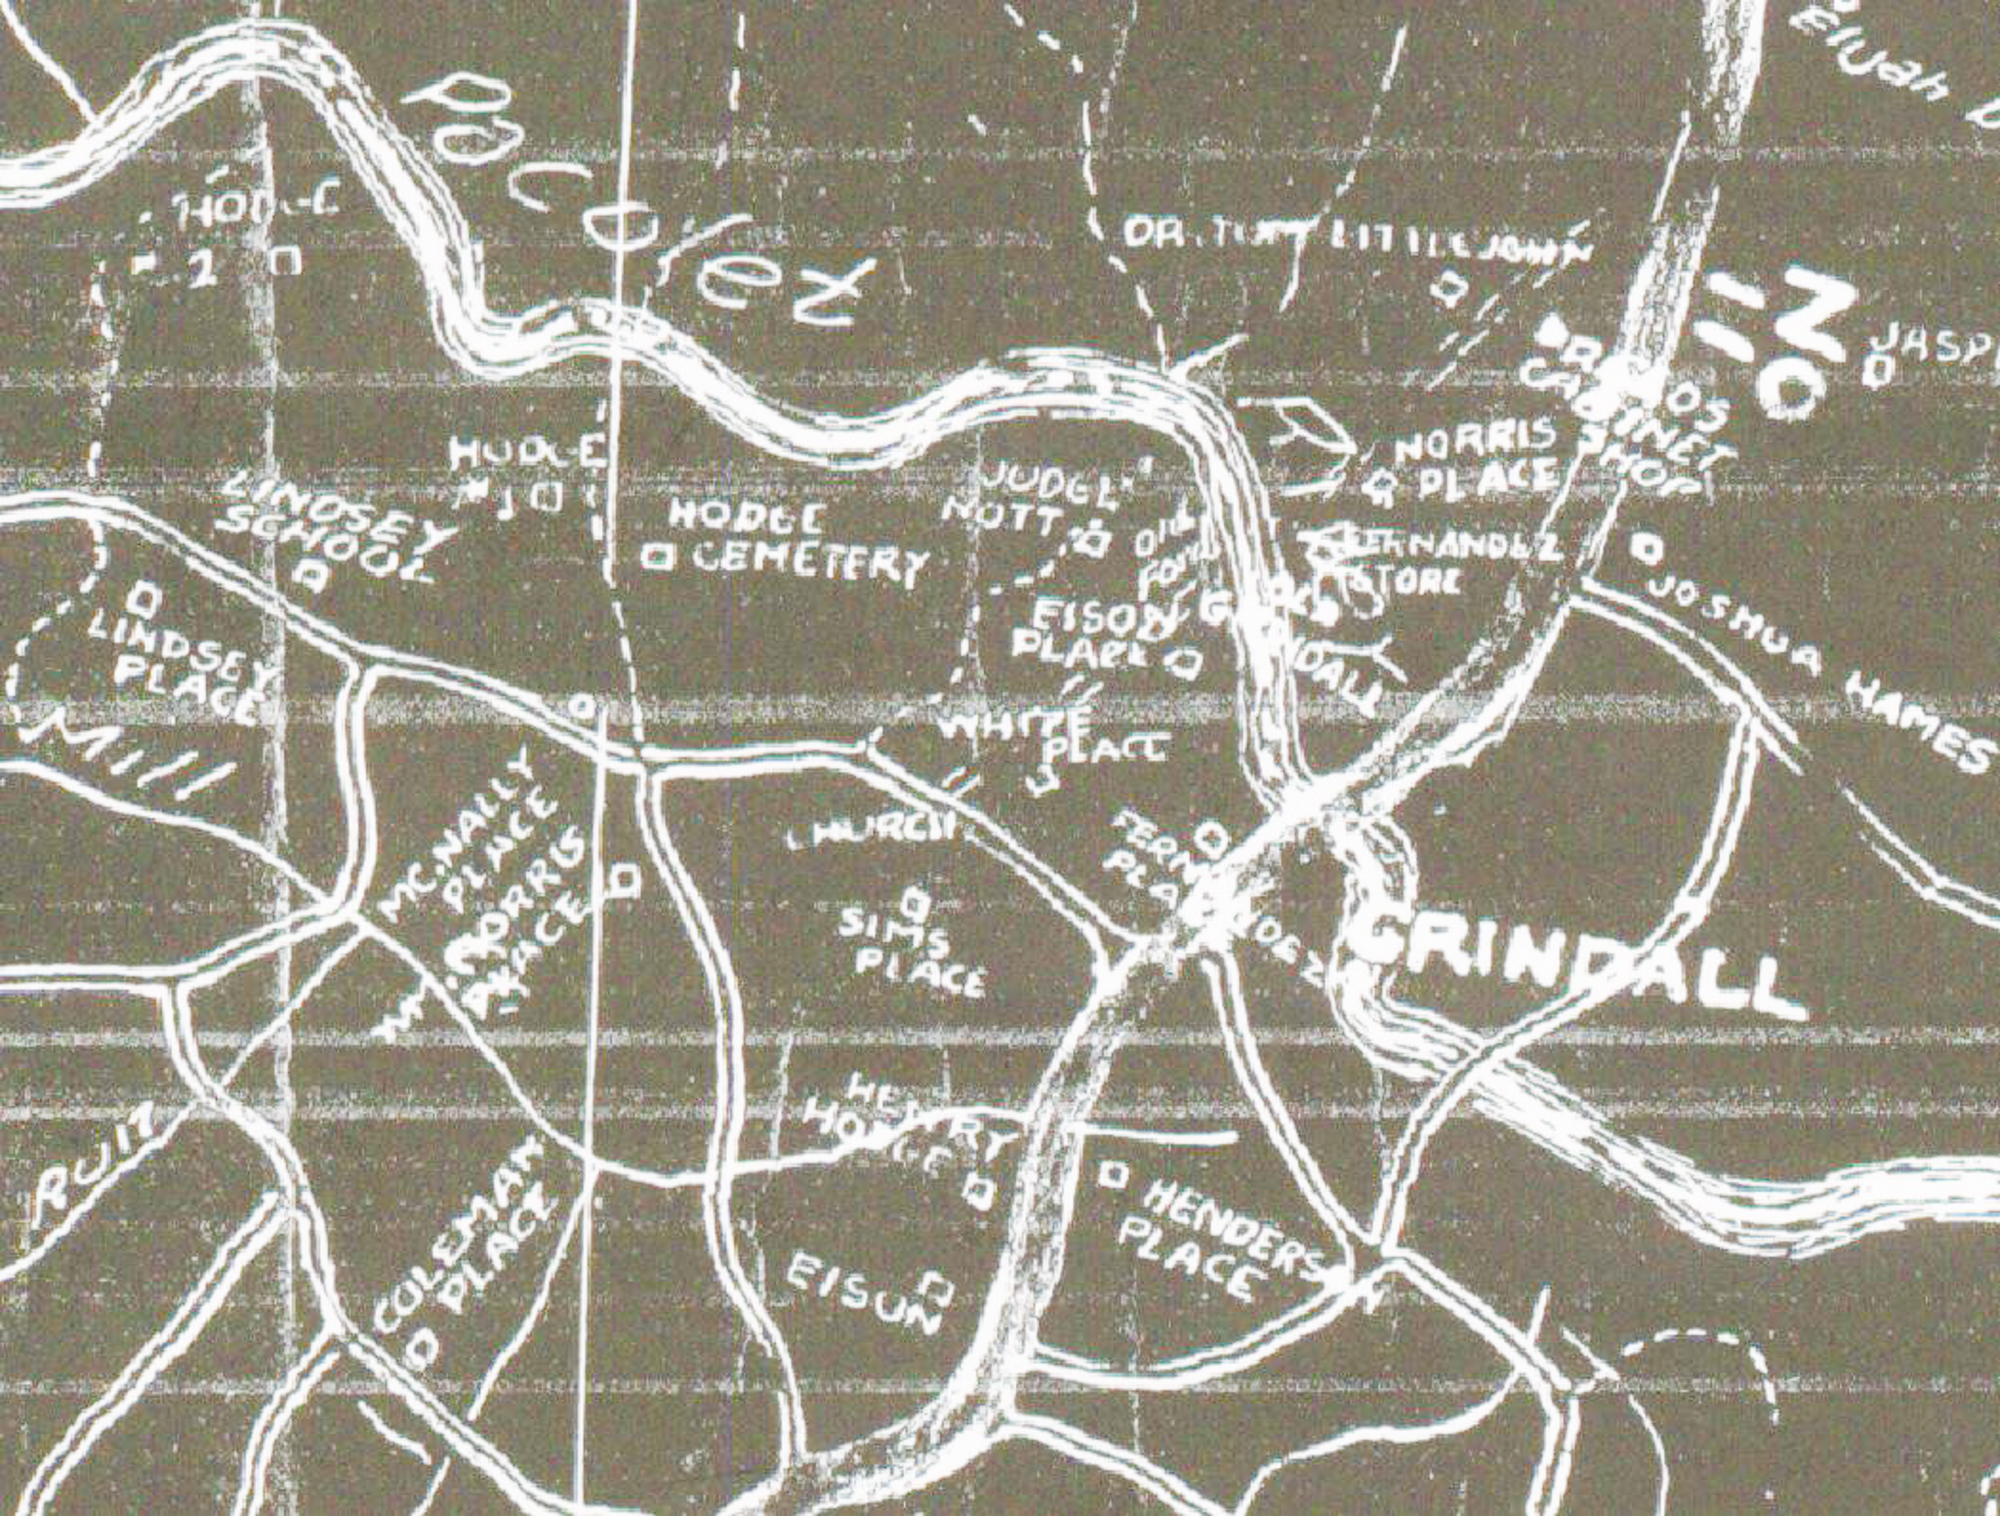 Glindal Shoals on the Pacolet River South of Cowpens was an important crossing for military operations.  Map section courtesy of the Amos Collection - 2018